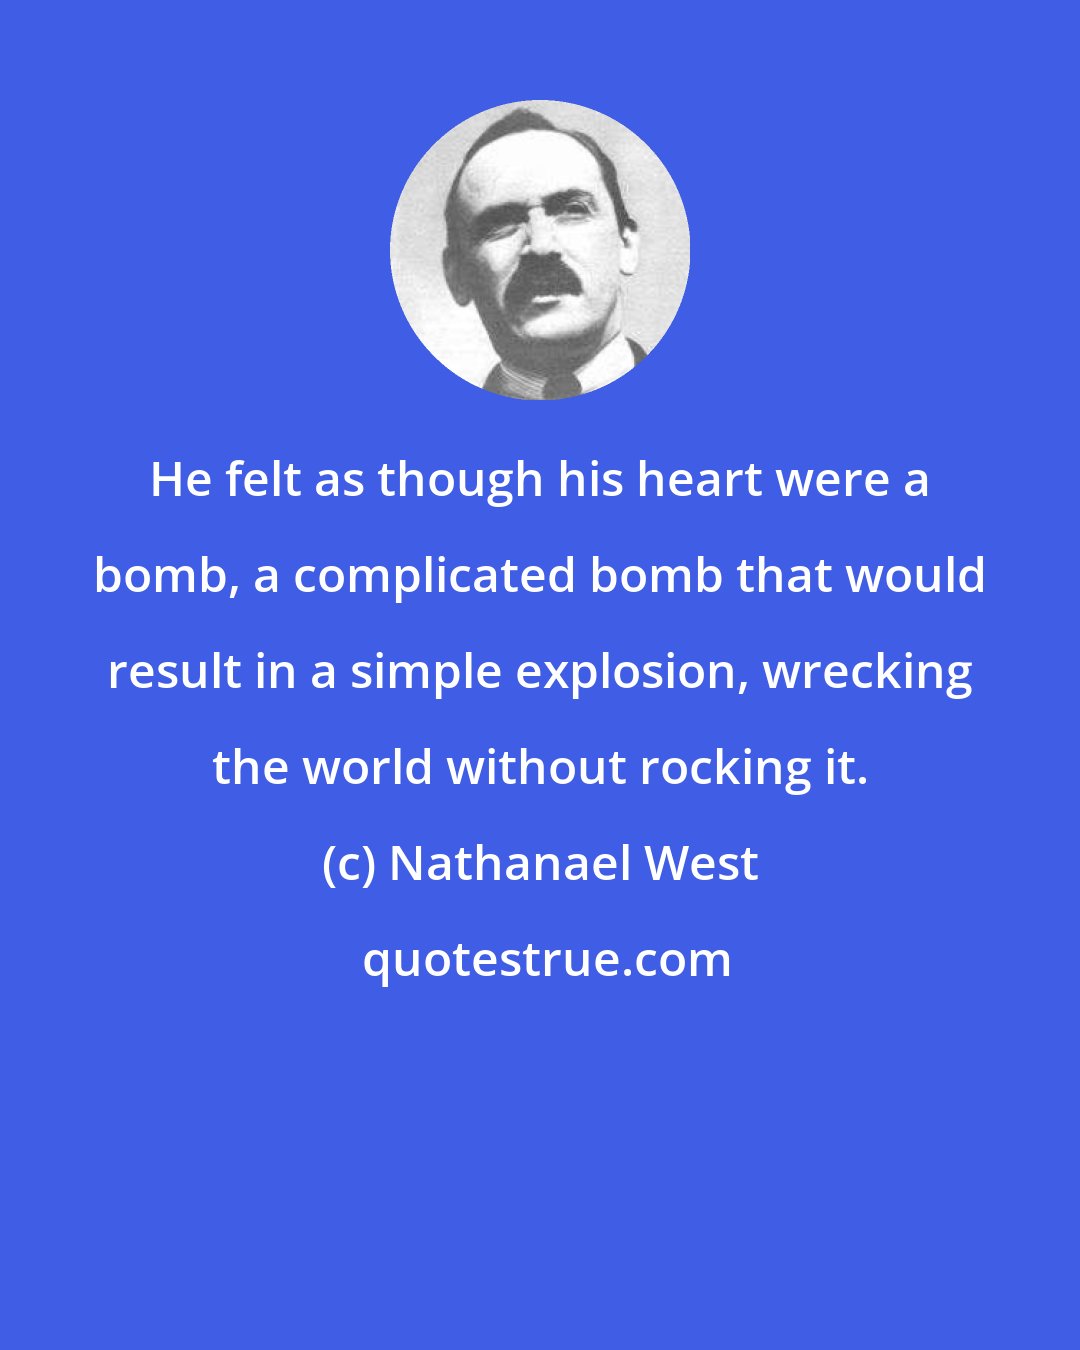 Nathanael West: He felt as though his heart were a bomb, a complicated bomb that would result in a simple explosion, wrecking the world without rocking it.